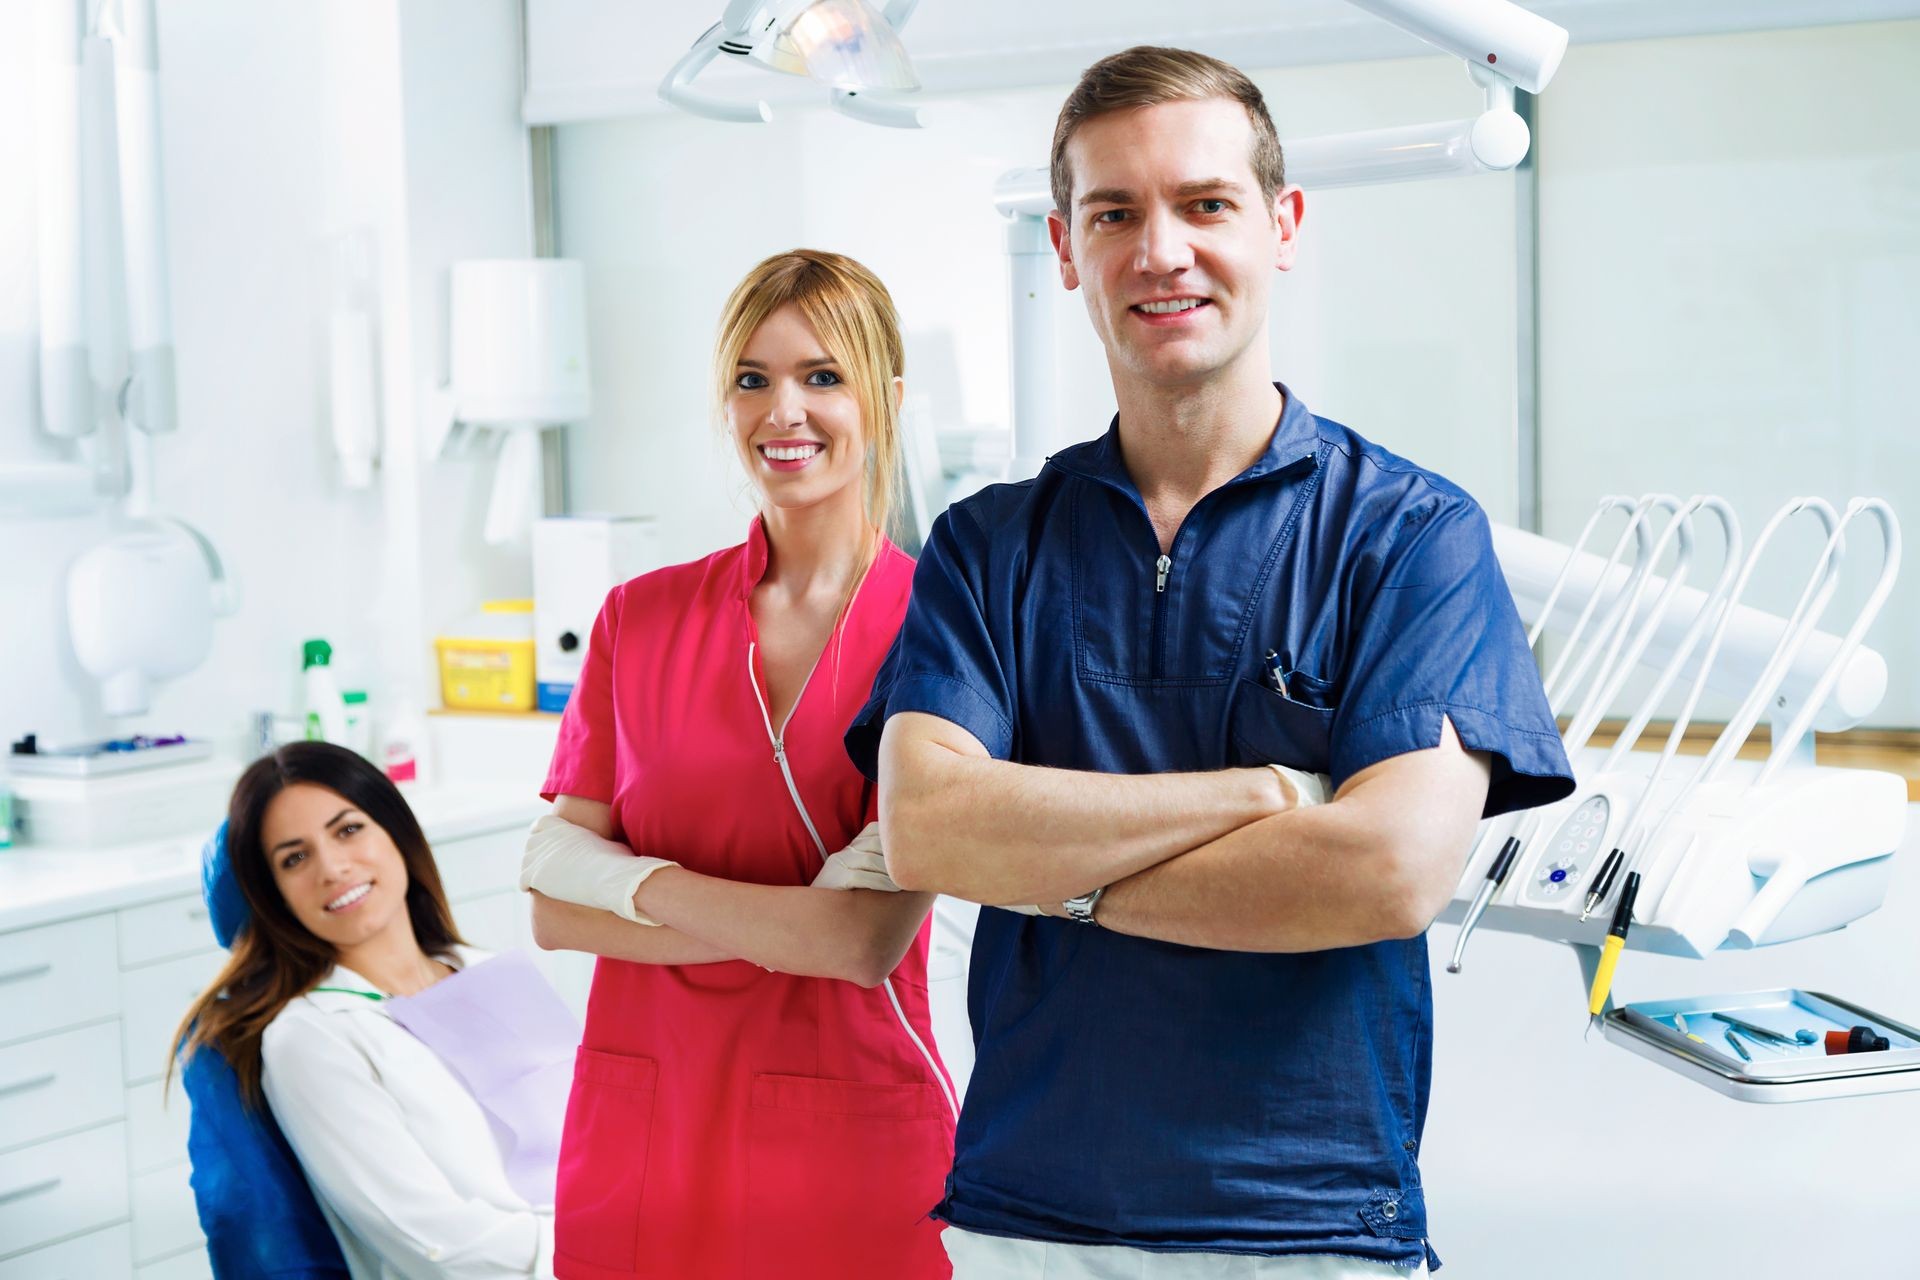 Portrait of two young dentists with the patient looking at camera while standing in a dental clinic.